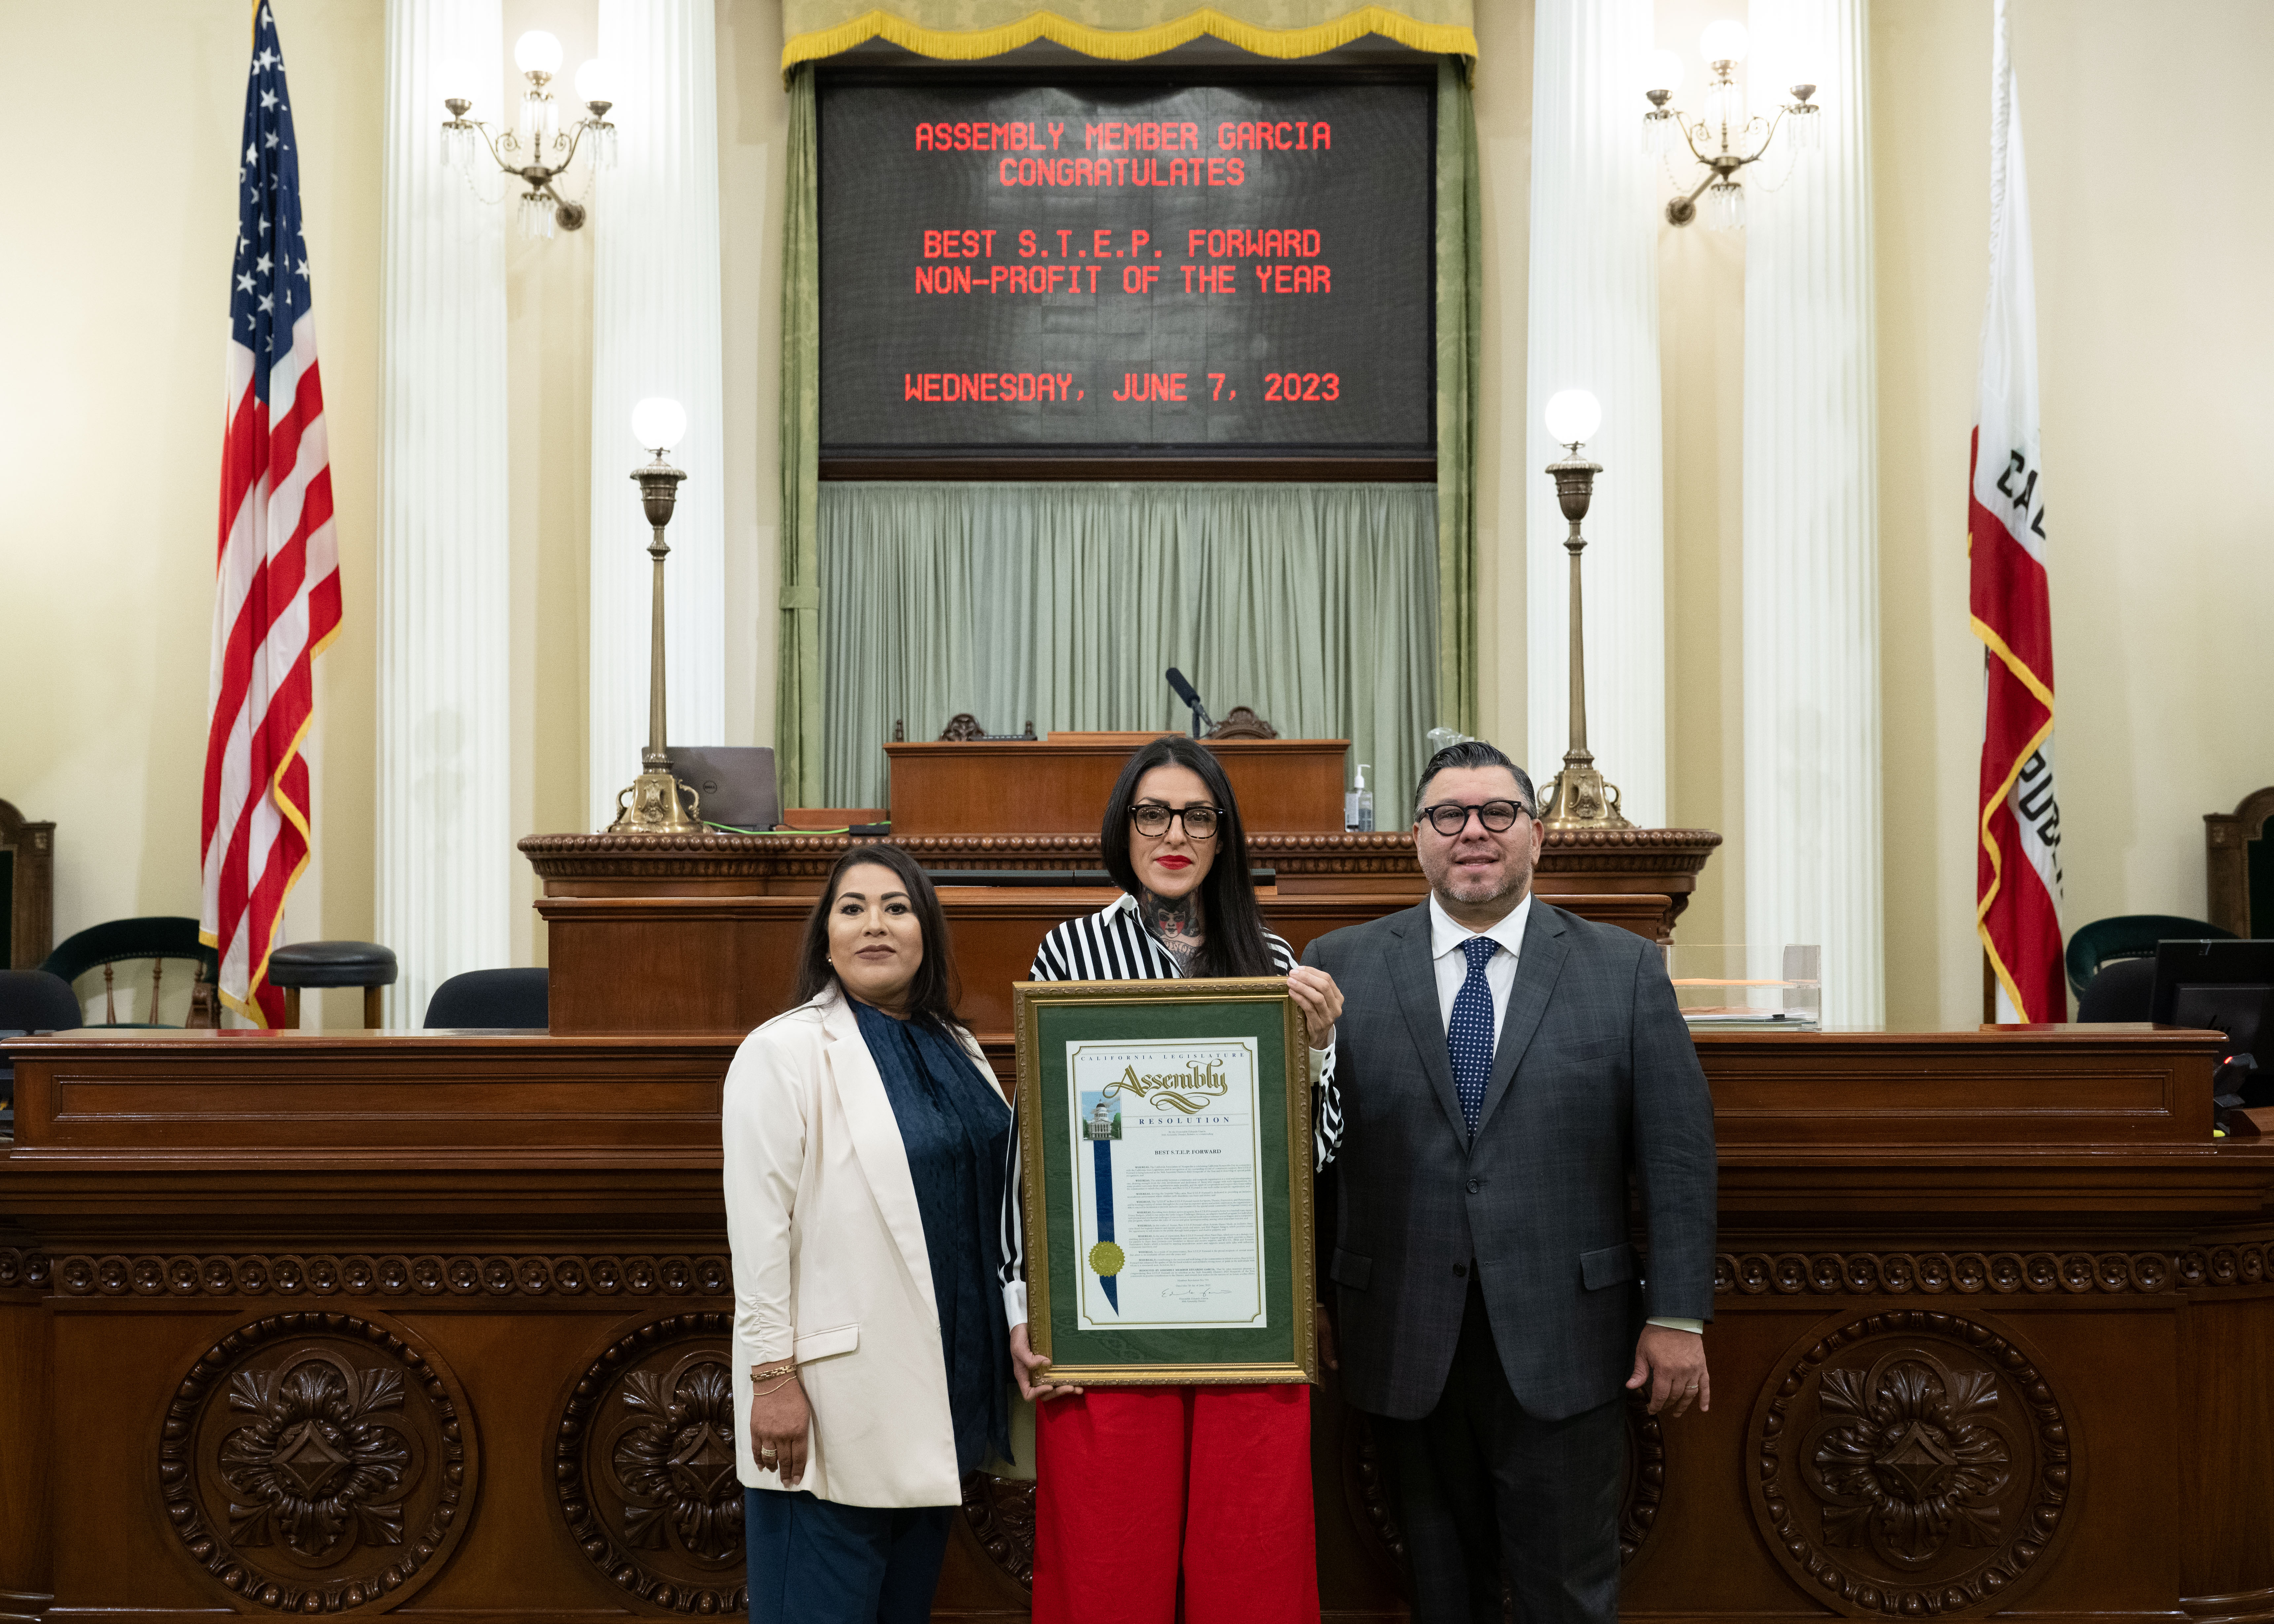 Assemblymember Garcia presents award to Best S.T.E.P Forward